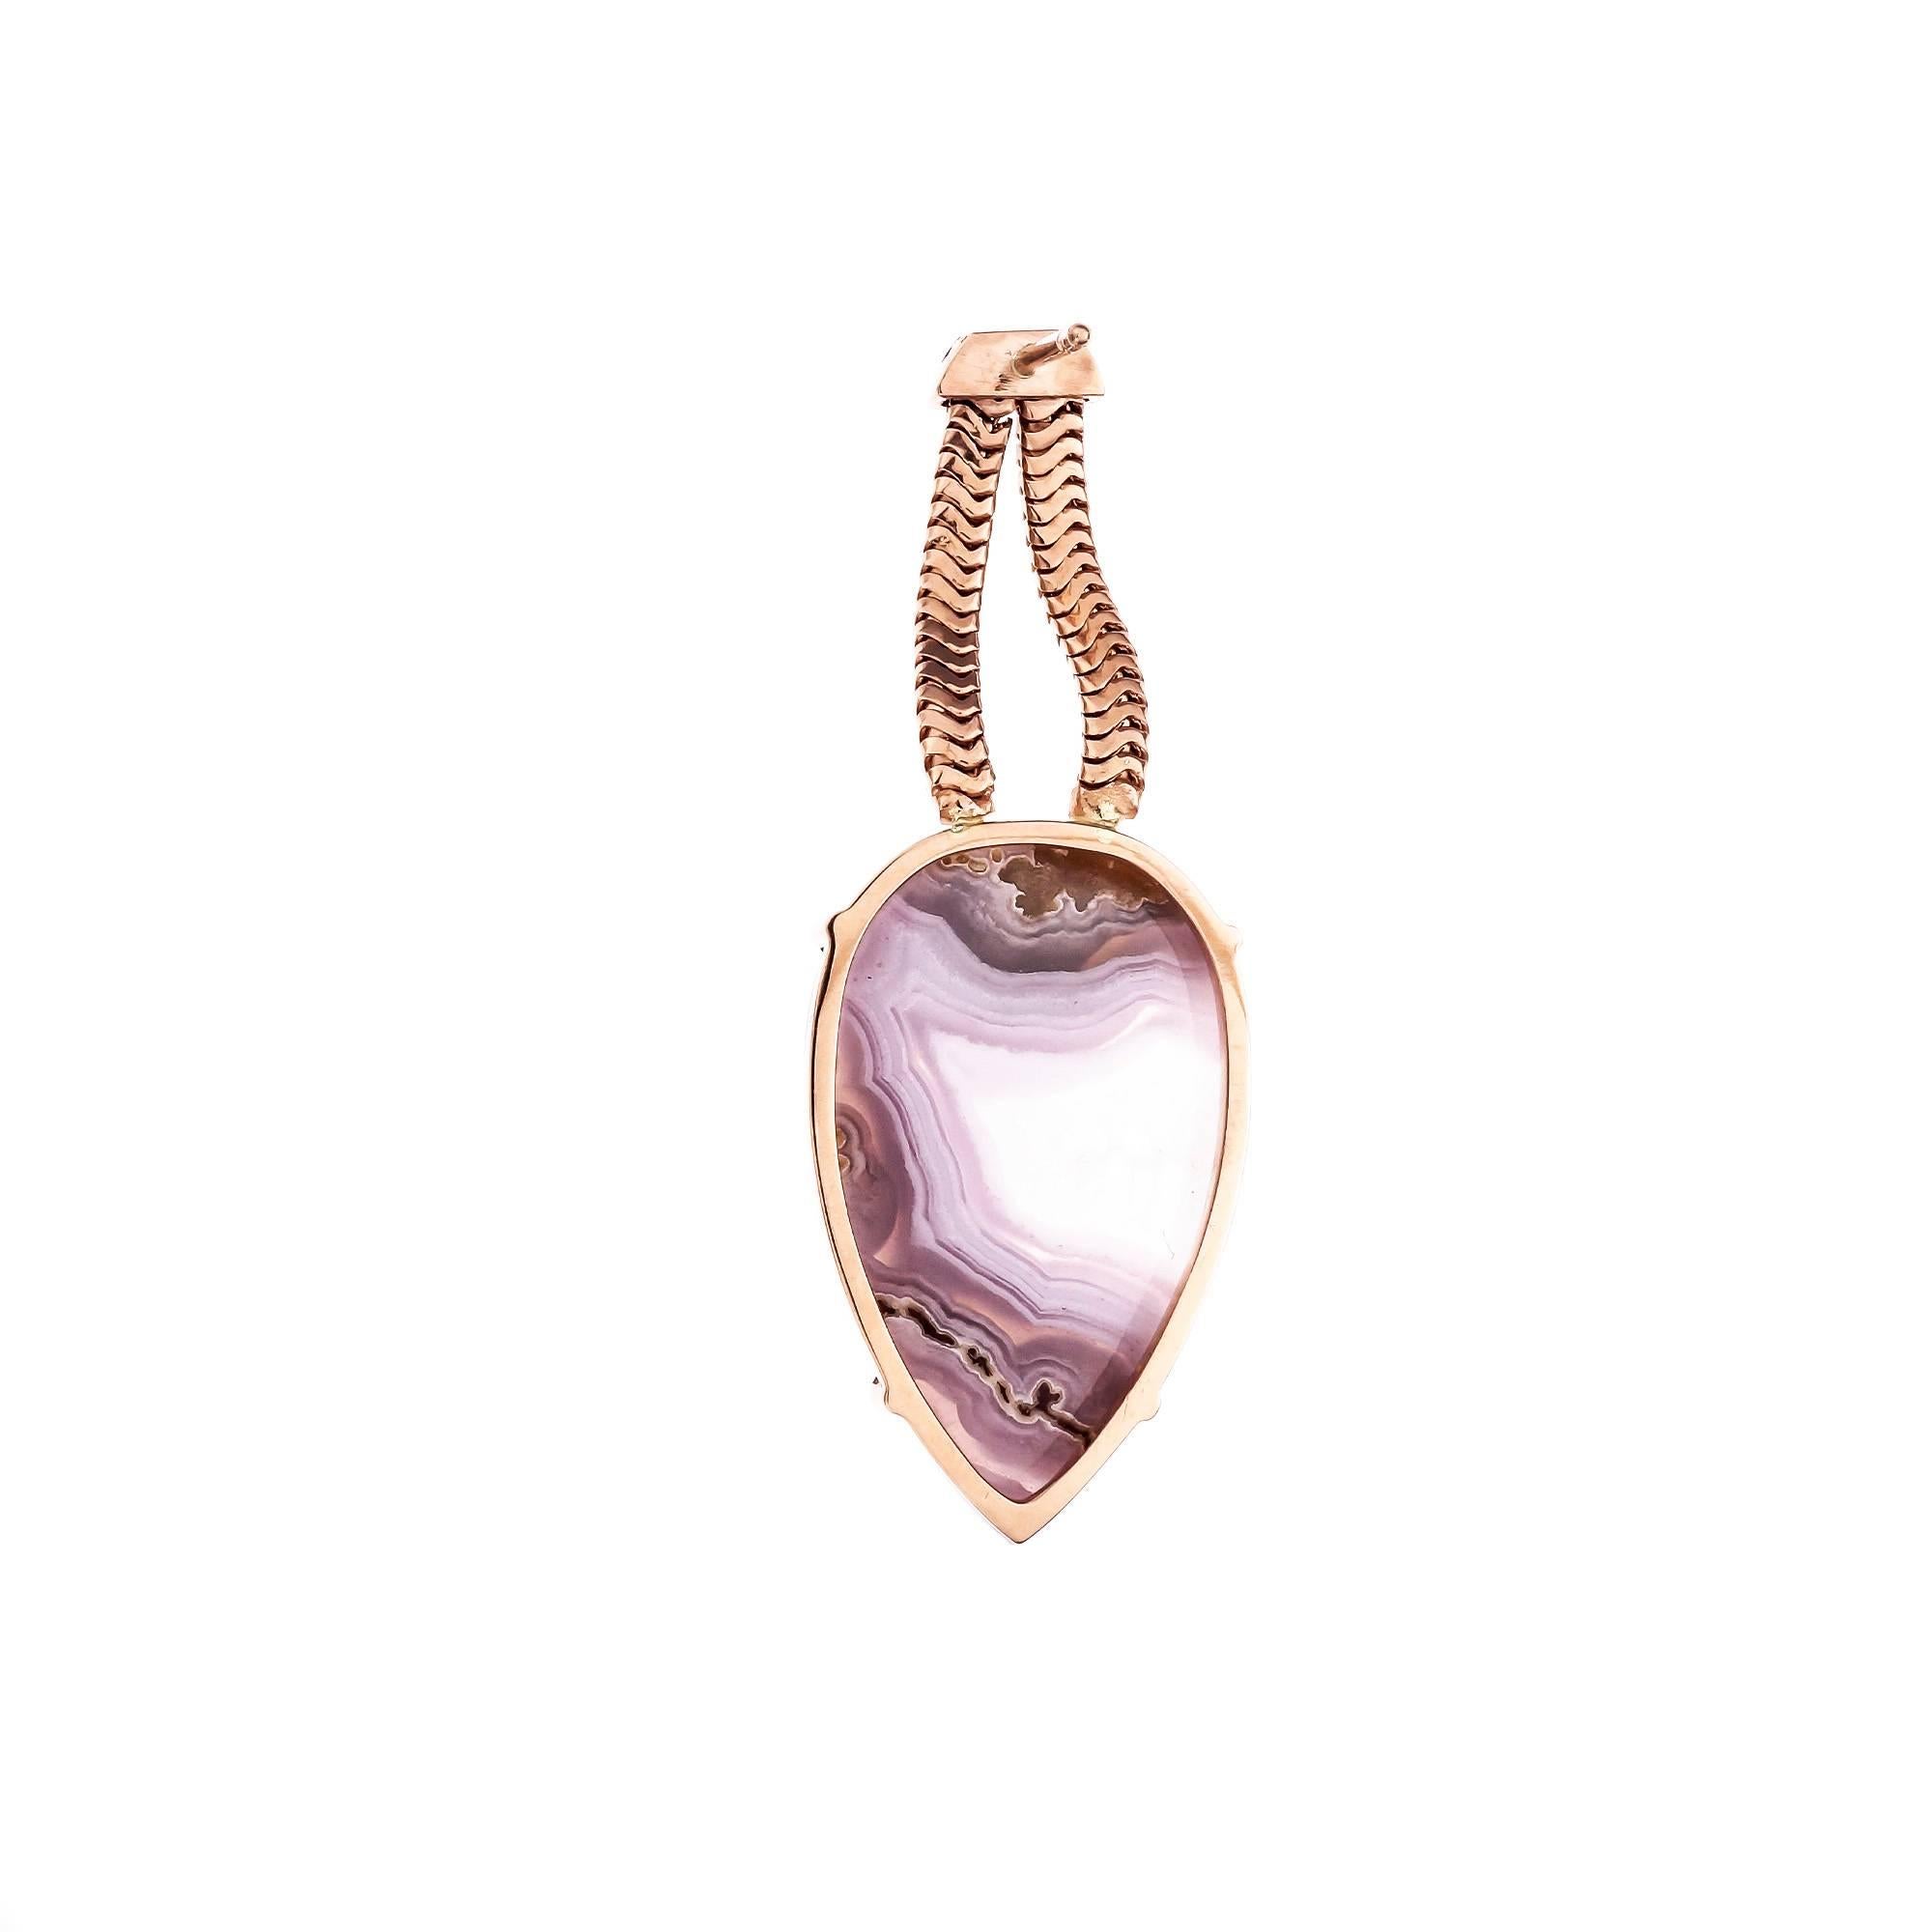 Peter Suchy natural lace Agate dangle earrings handmade in 14k rose gold with a matched pair of pinkish purple lace translucent.

2 pear shape purple pink lace Agate, approx. total weight 27.35cts, natural inclusions
14k rose gold
13.0 grams
Tested: